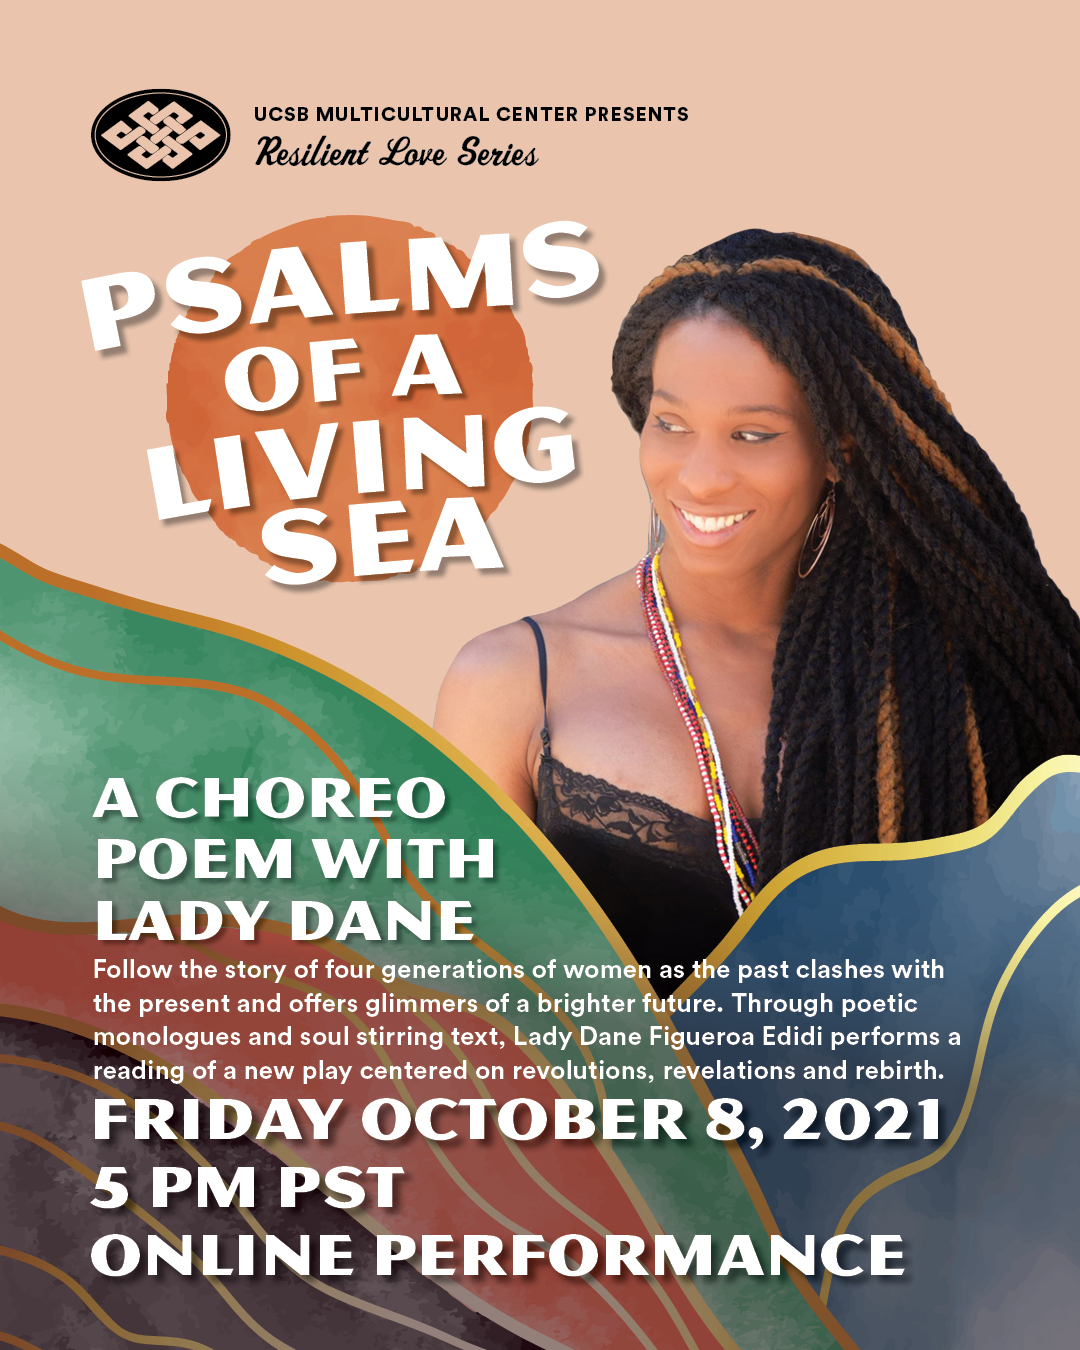 Psalms of A Living Sea: A Choreo Poem with Lady Dane